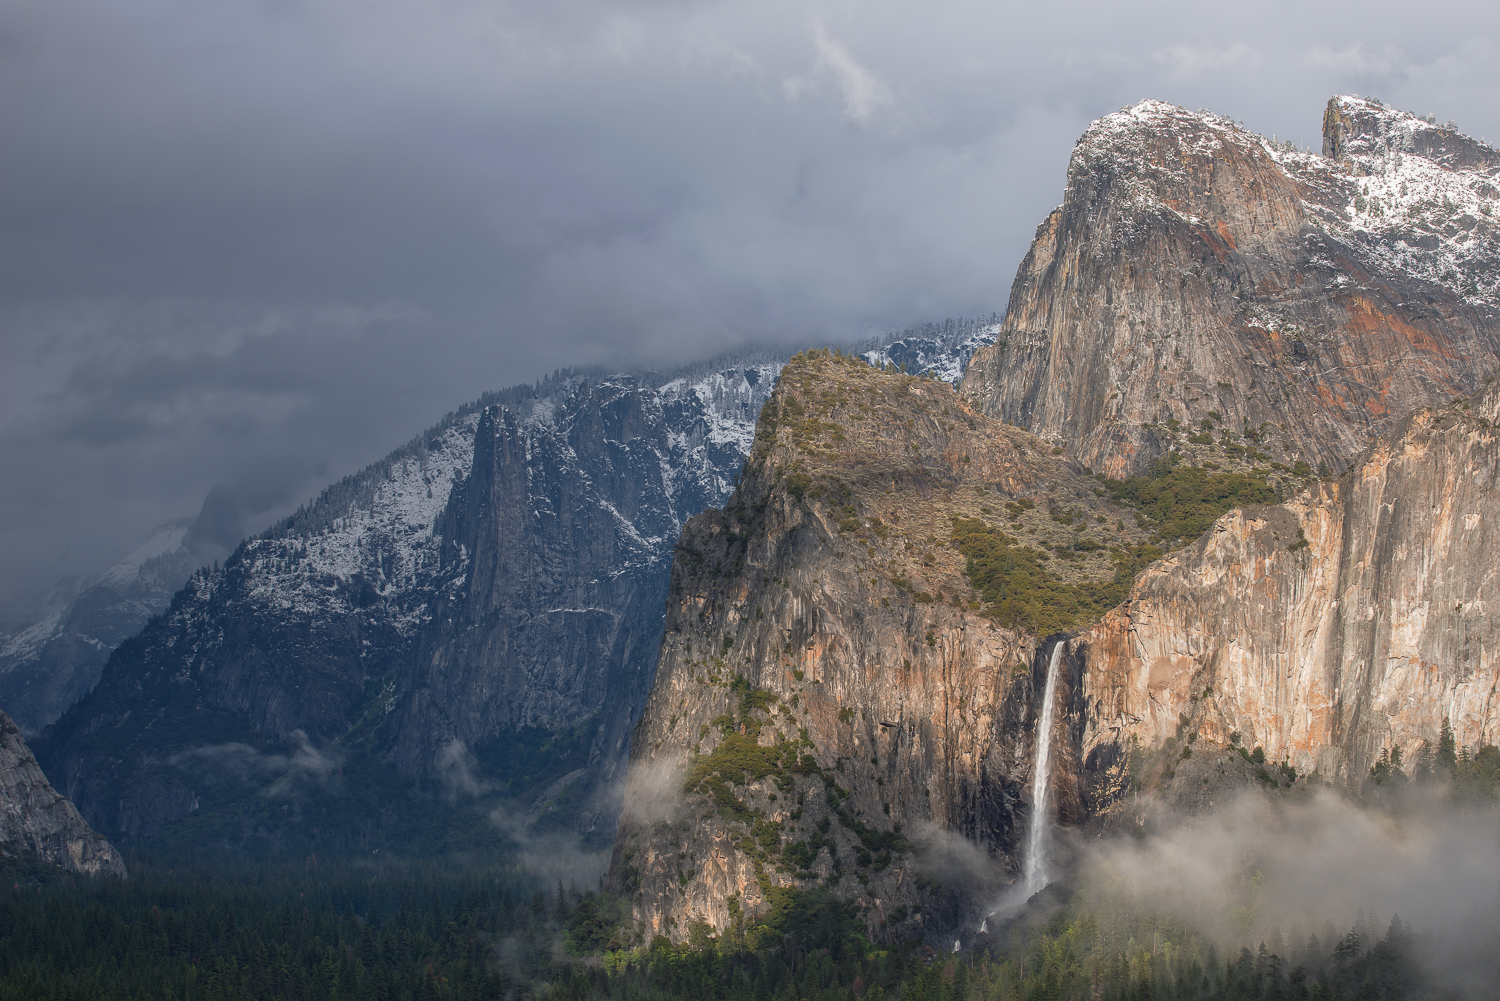 Afternoon light peaks through a passing storm to light up Bridalveil Falls